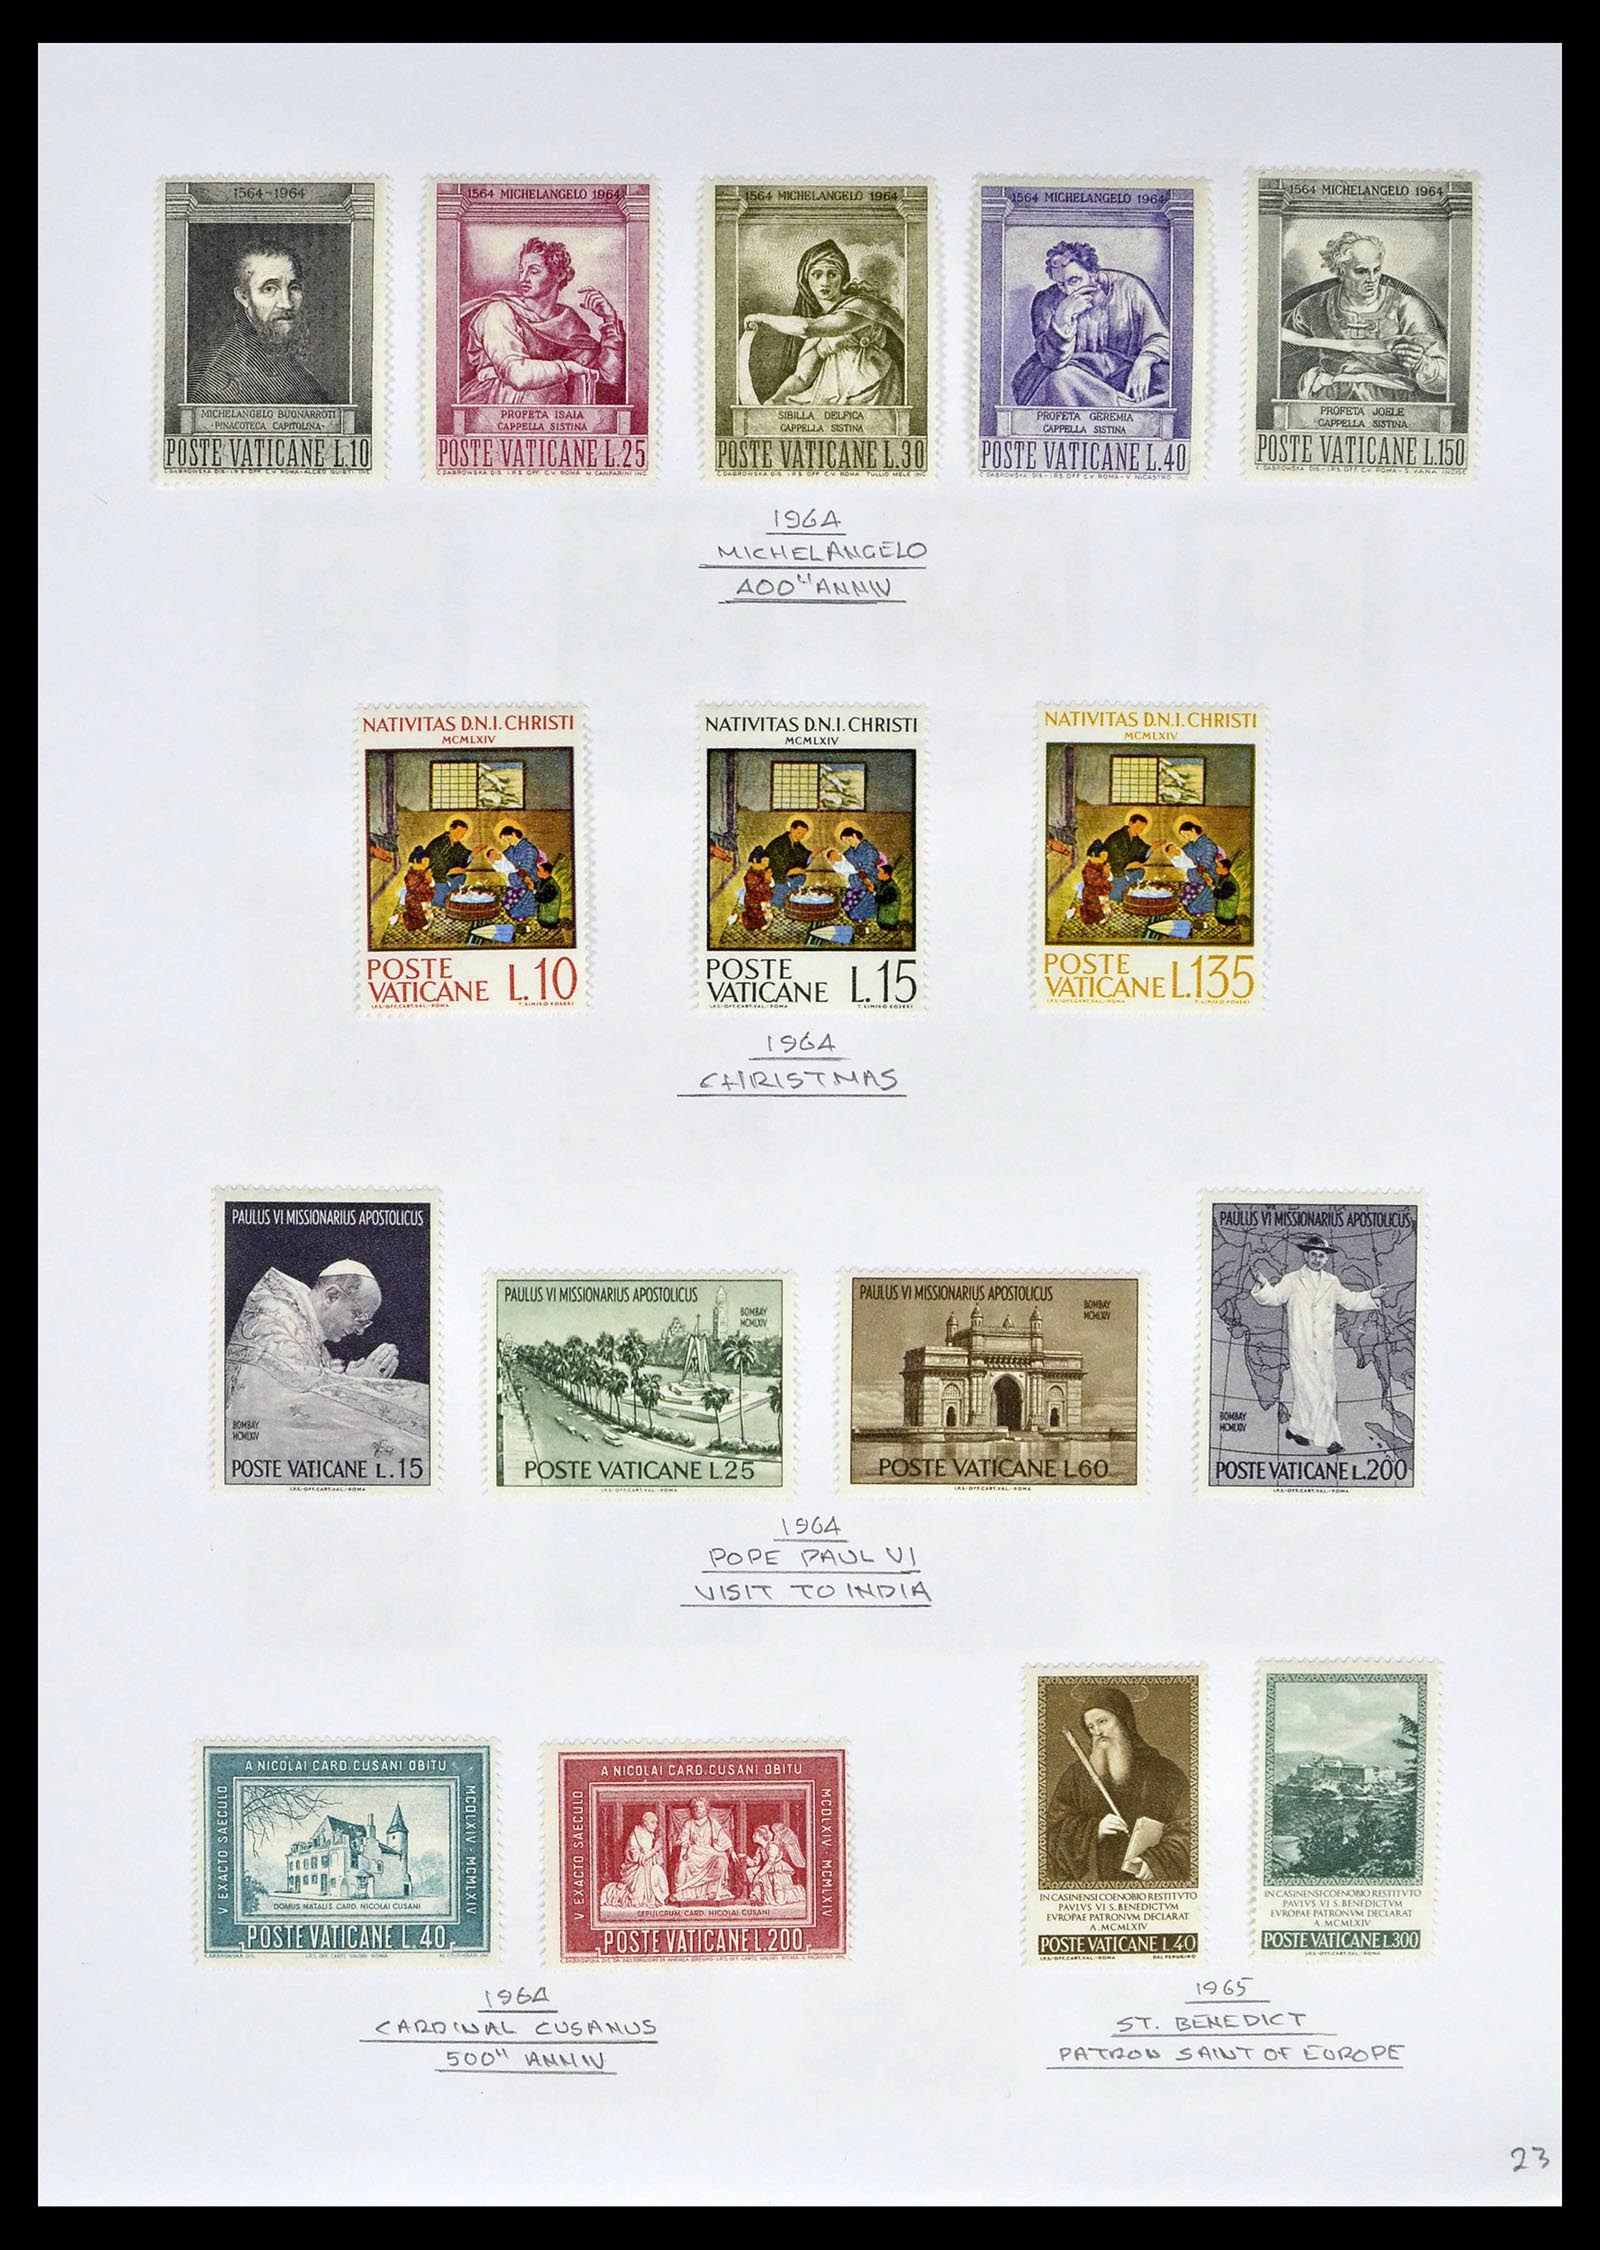 39099 0025 - Stamp collection 39099 Vatican 1852-2008.